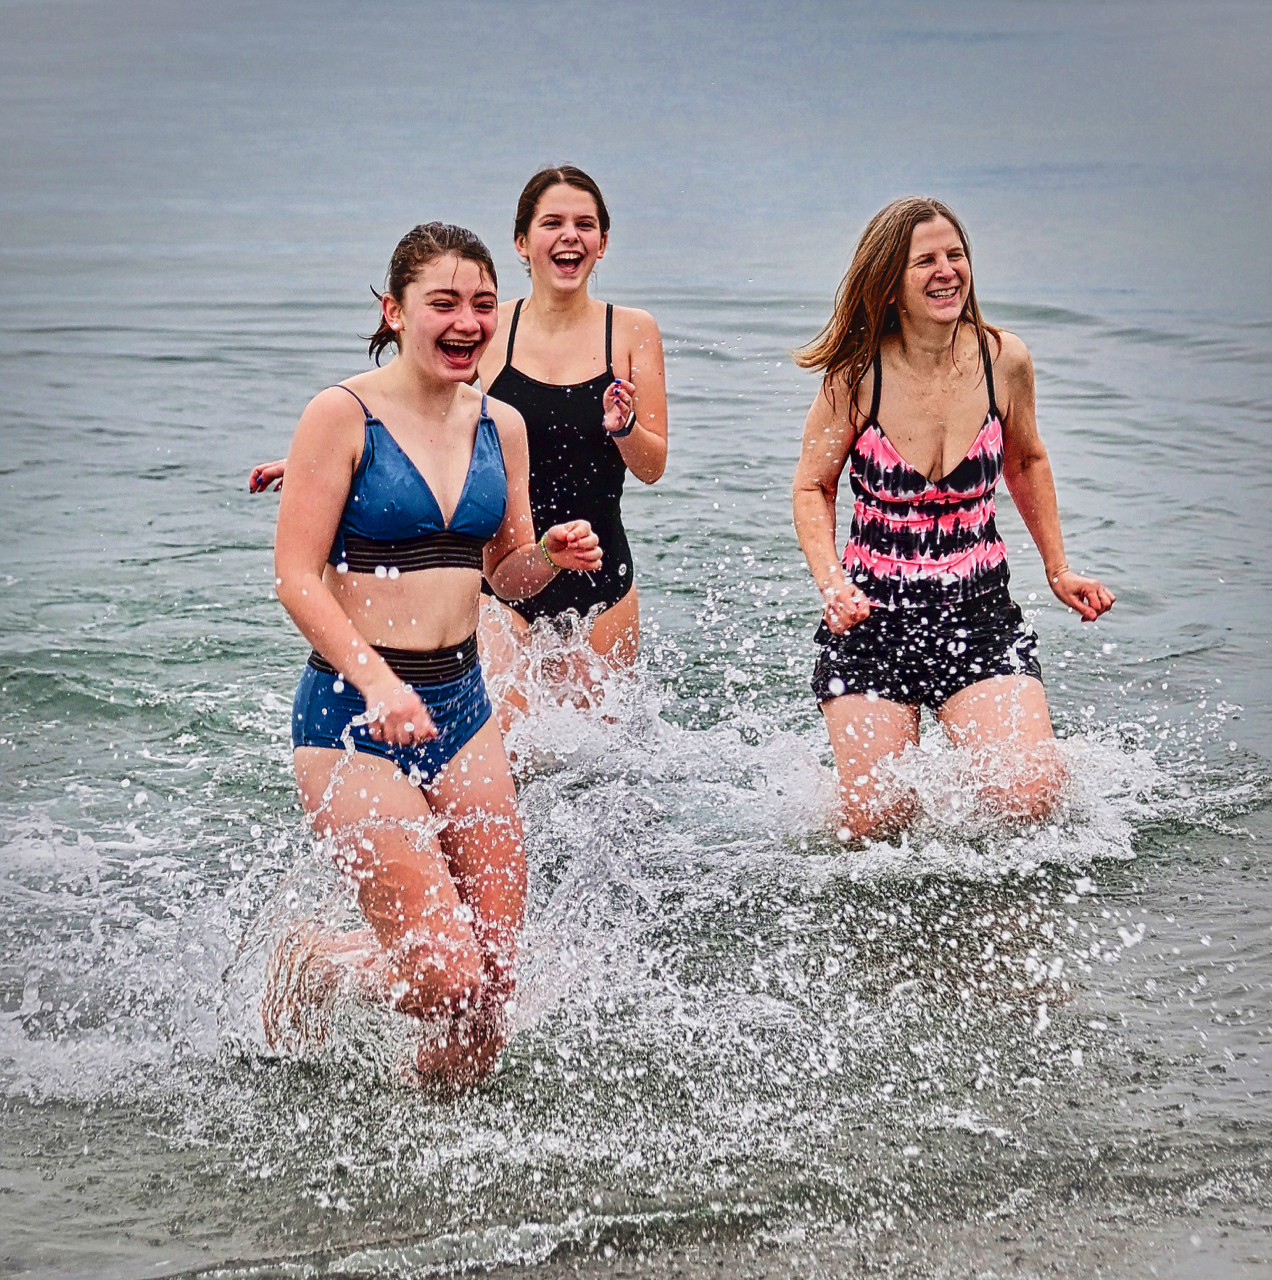 Polar bear swimmers plunged more safely for 2021 New Years Day tradition